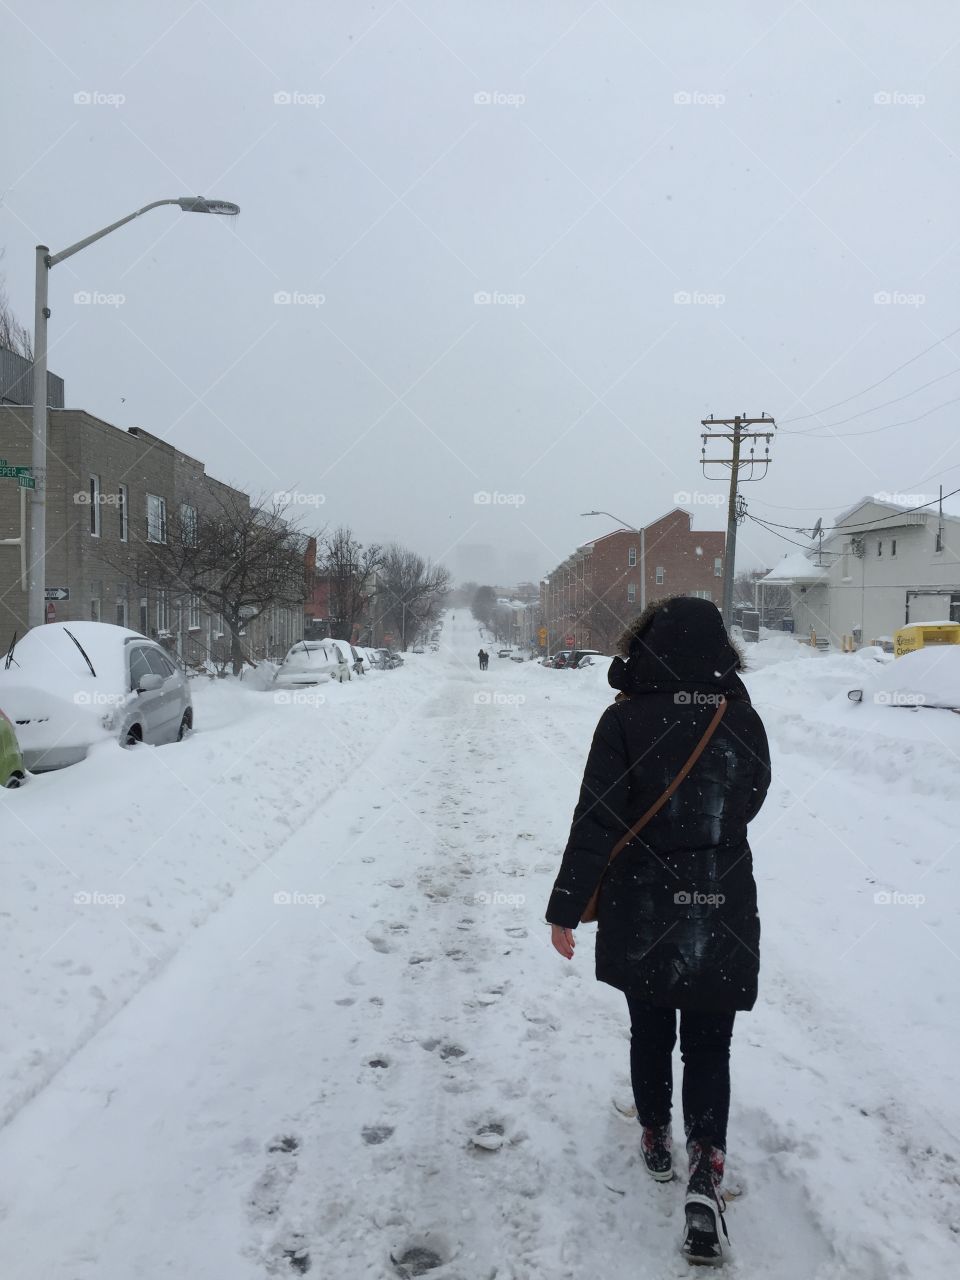 Walking through the streets of Baltimore during the blizzard of 2016!